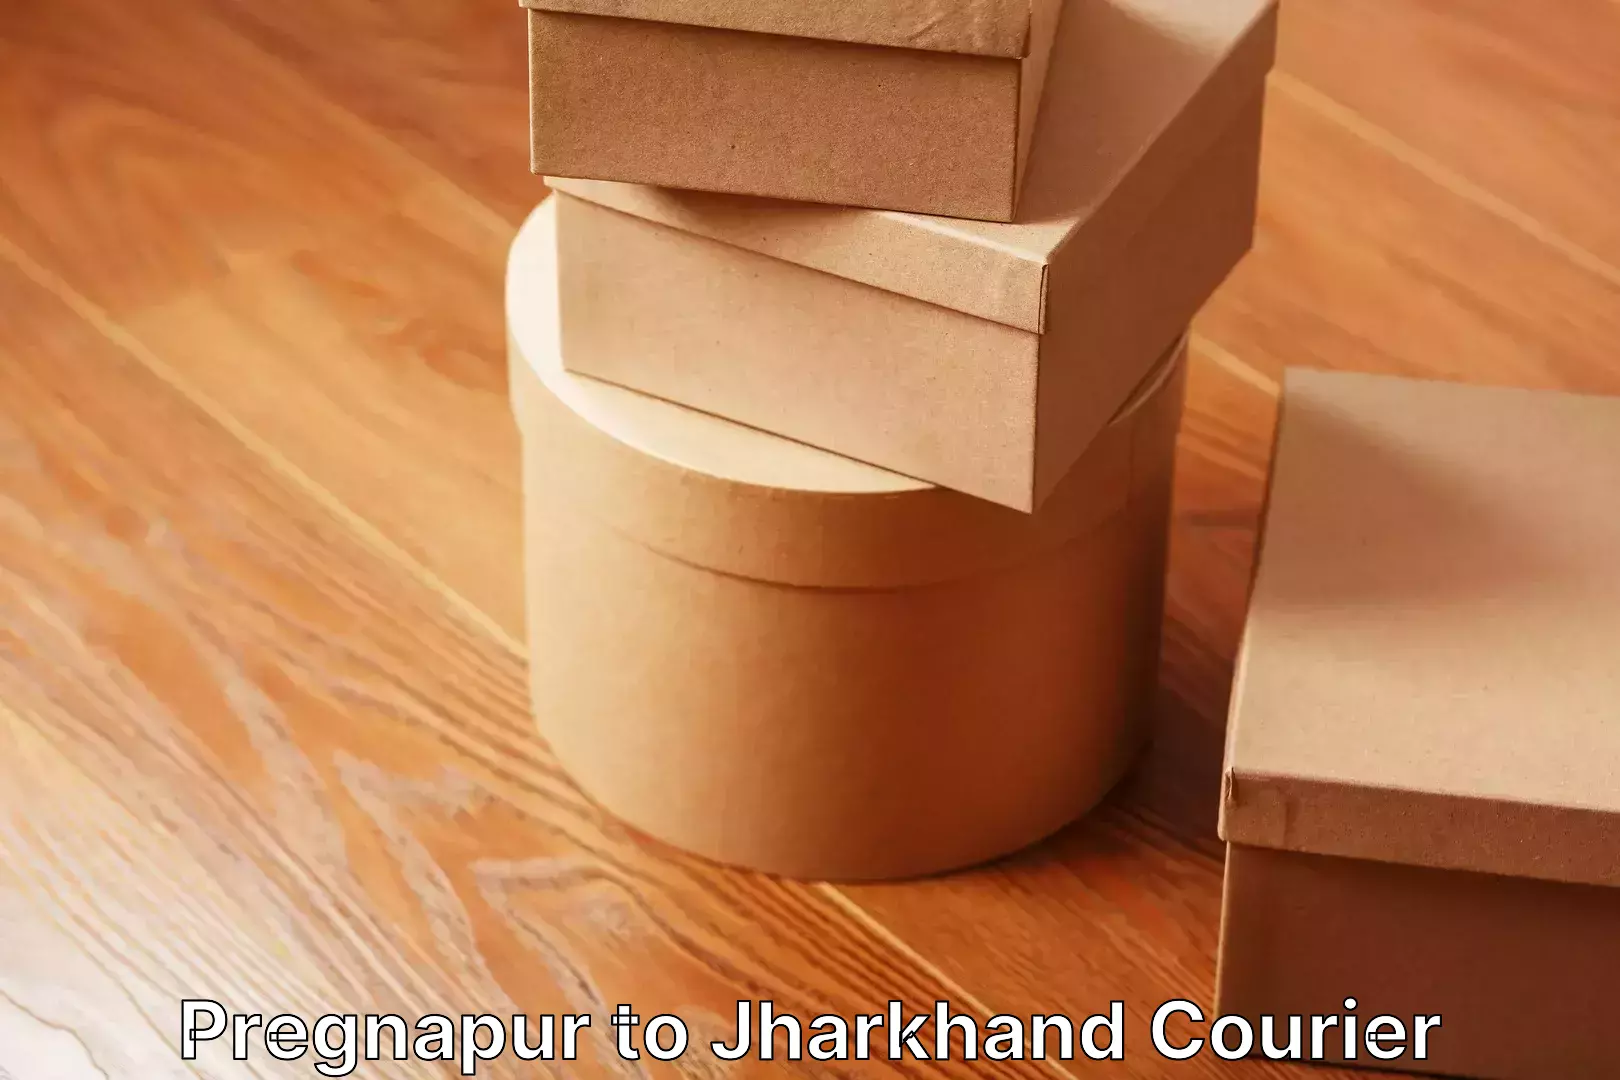 Moving and handling services Pregnapur to Jharkhand